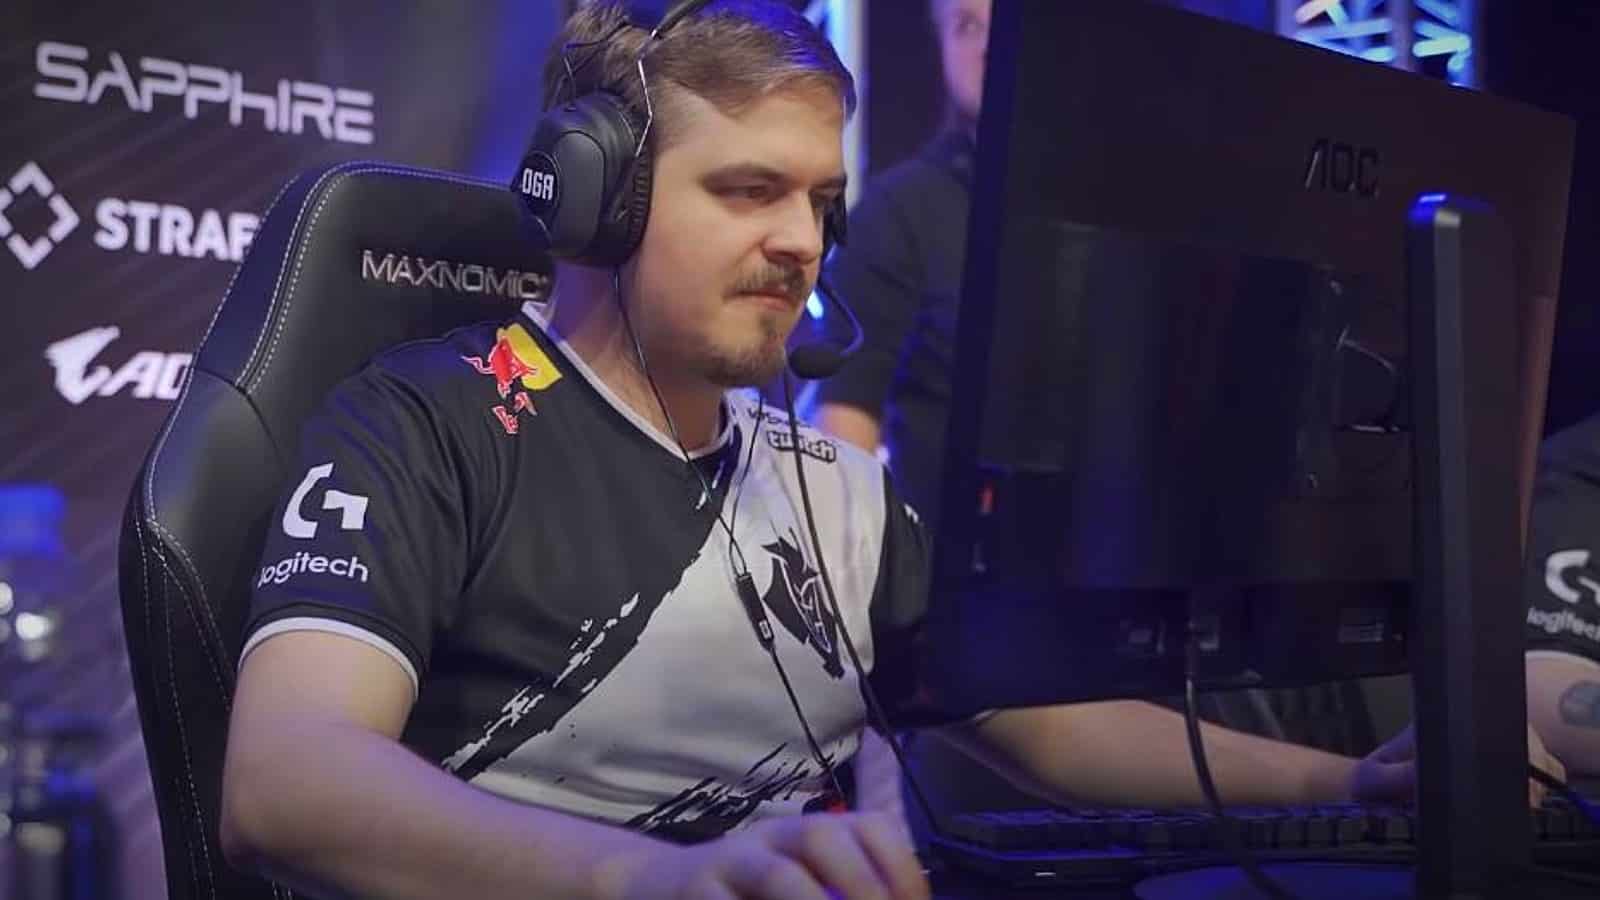 R6 player Fabian competing at an event